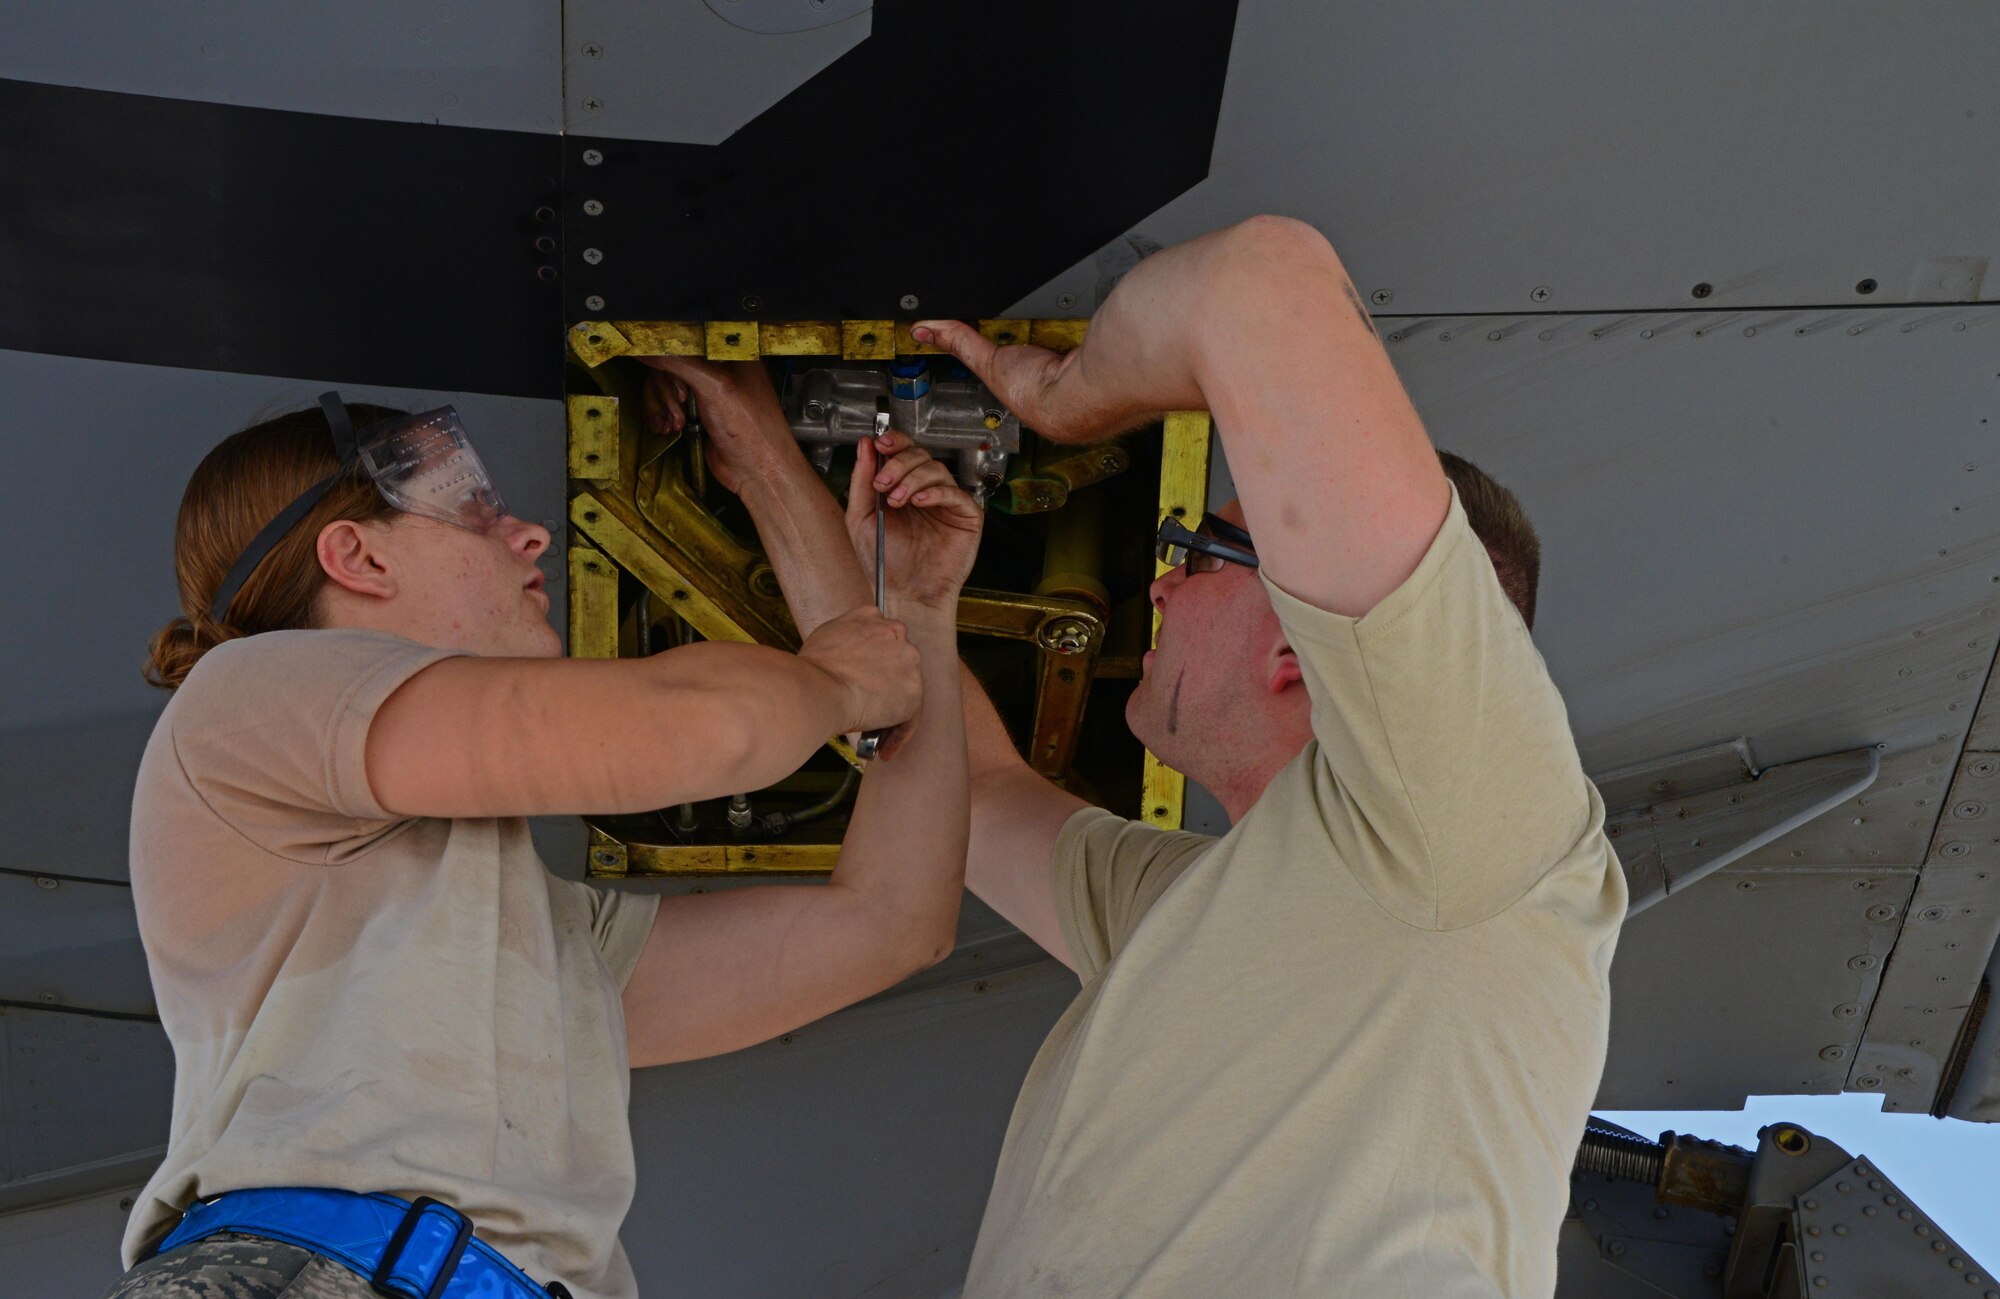 U.S. Air Force Senior Airmen Kara Quispez, left, and Michael Hoover, 340th Expeditionary Aircraft Maintenance Unit hydraulics mechanics, reseal the leading edge flap control valve on a KC-135 Stratotanker, March 3, 2015, at Al Udeid Air Base, Qatar. The KC-135’s air refueling capability reduces the risk and need for aircraft to land and refuel. (U.S. Air Force photo by Senior Airman Kia Atkins)